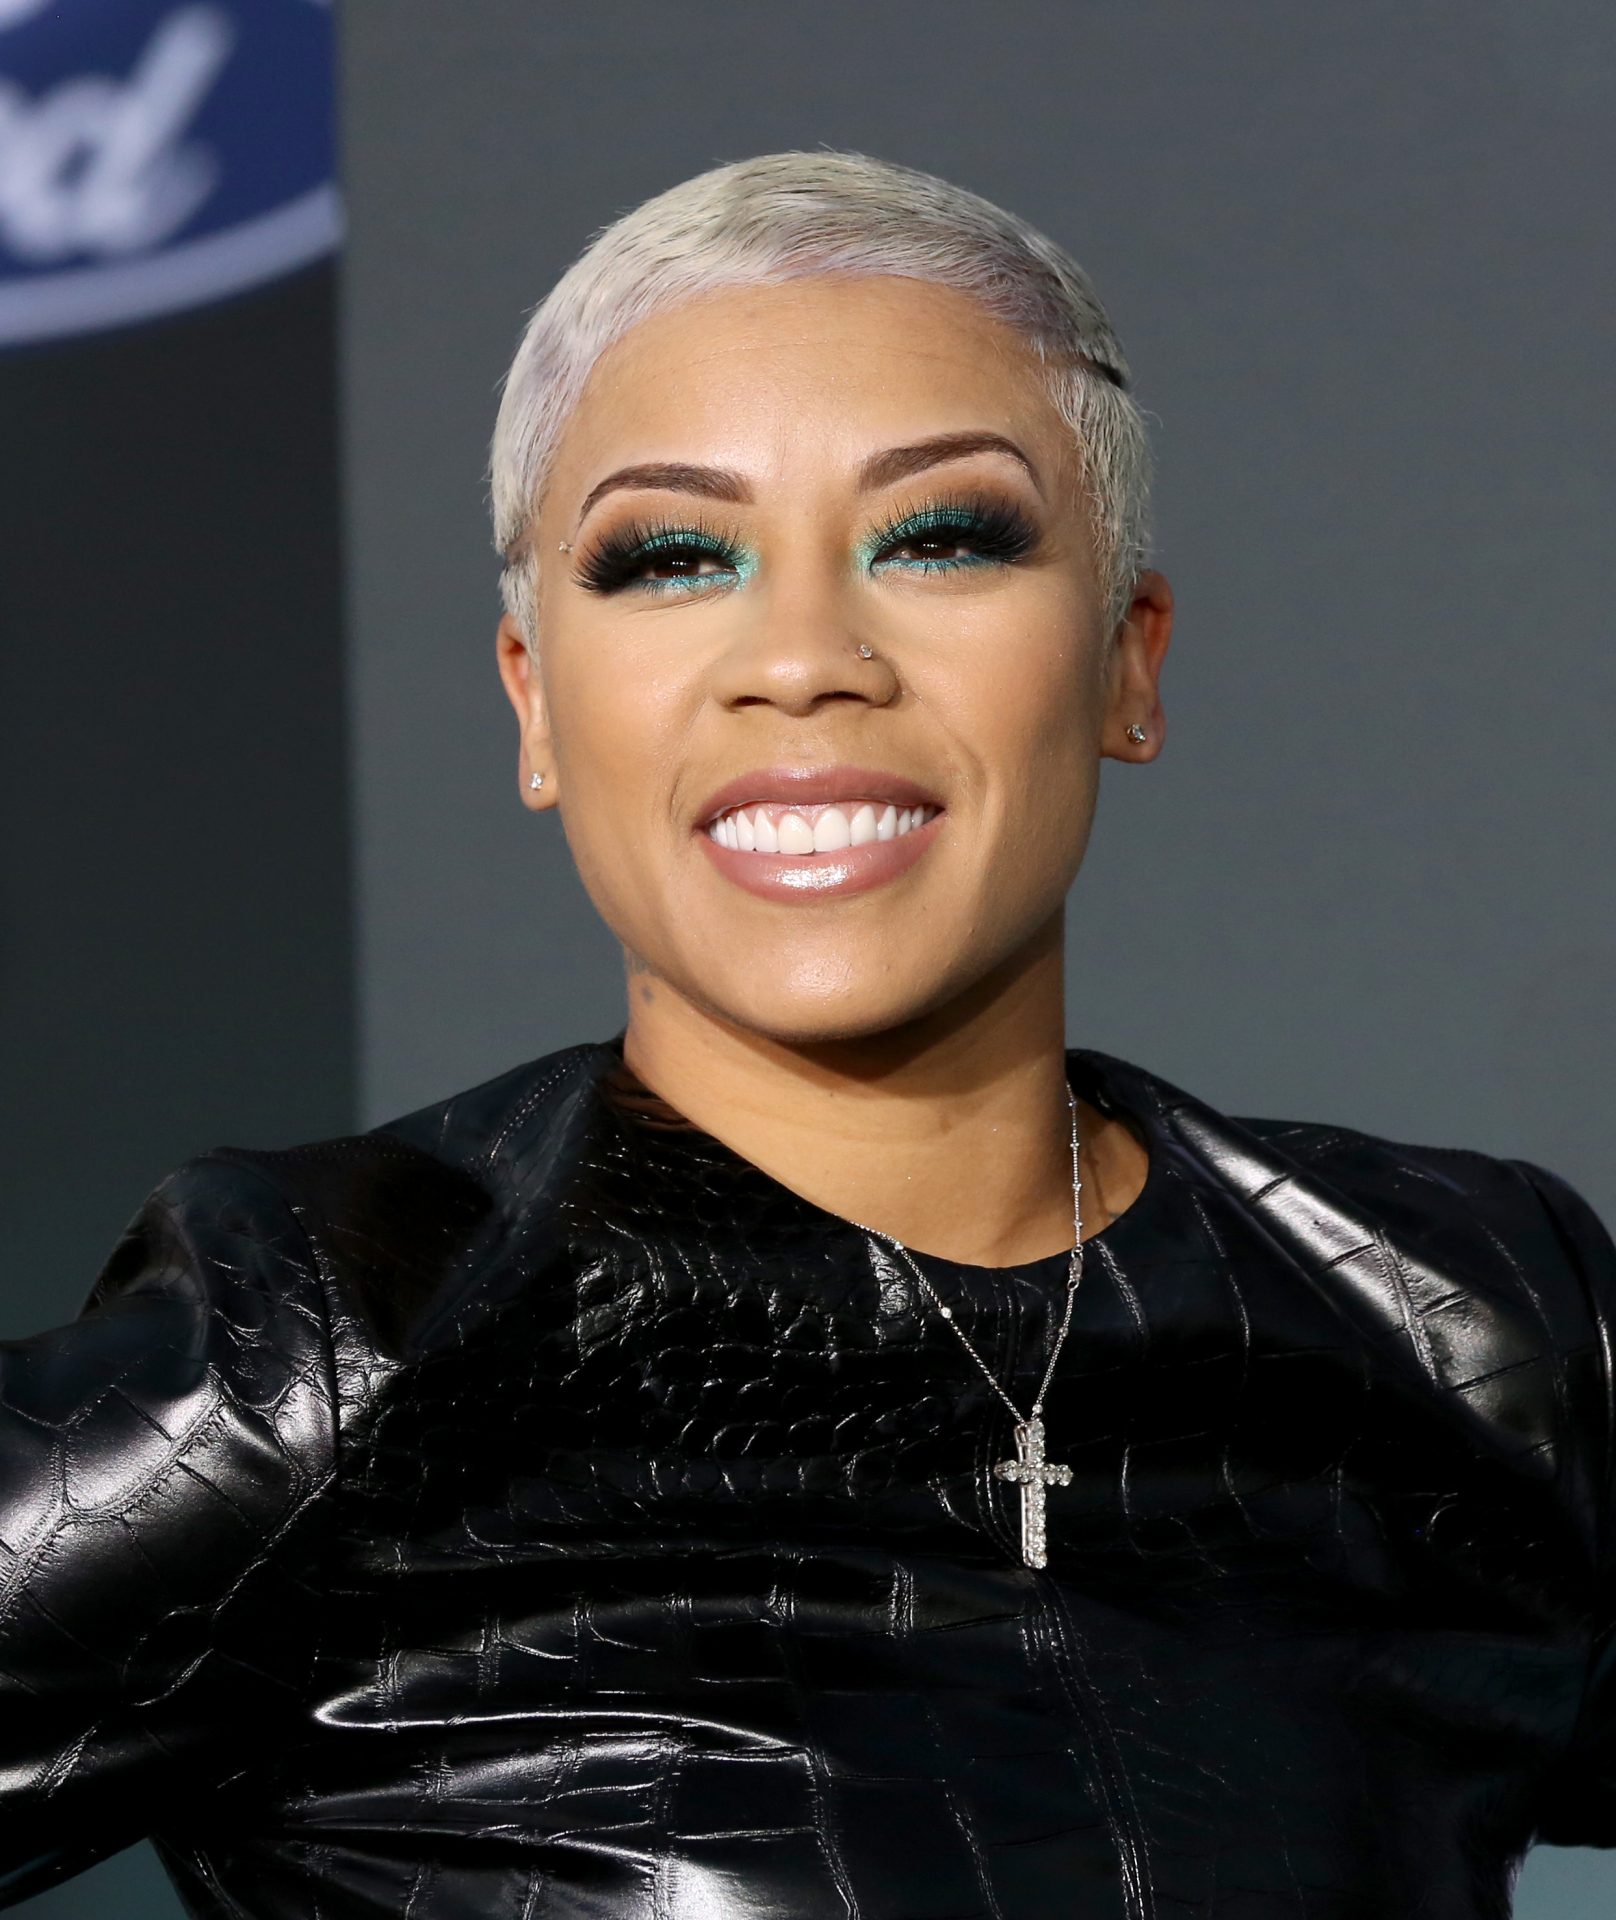 Keyshia Cole Makes It Clear That She Misses Antonio Brown…“A Lot”